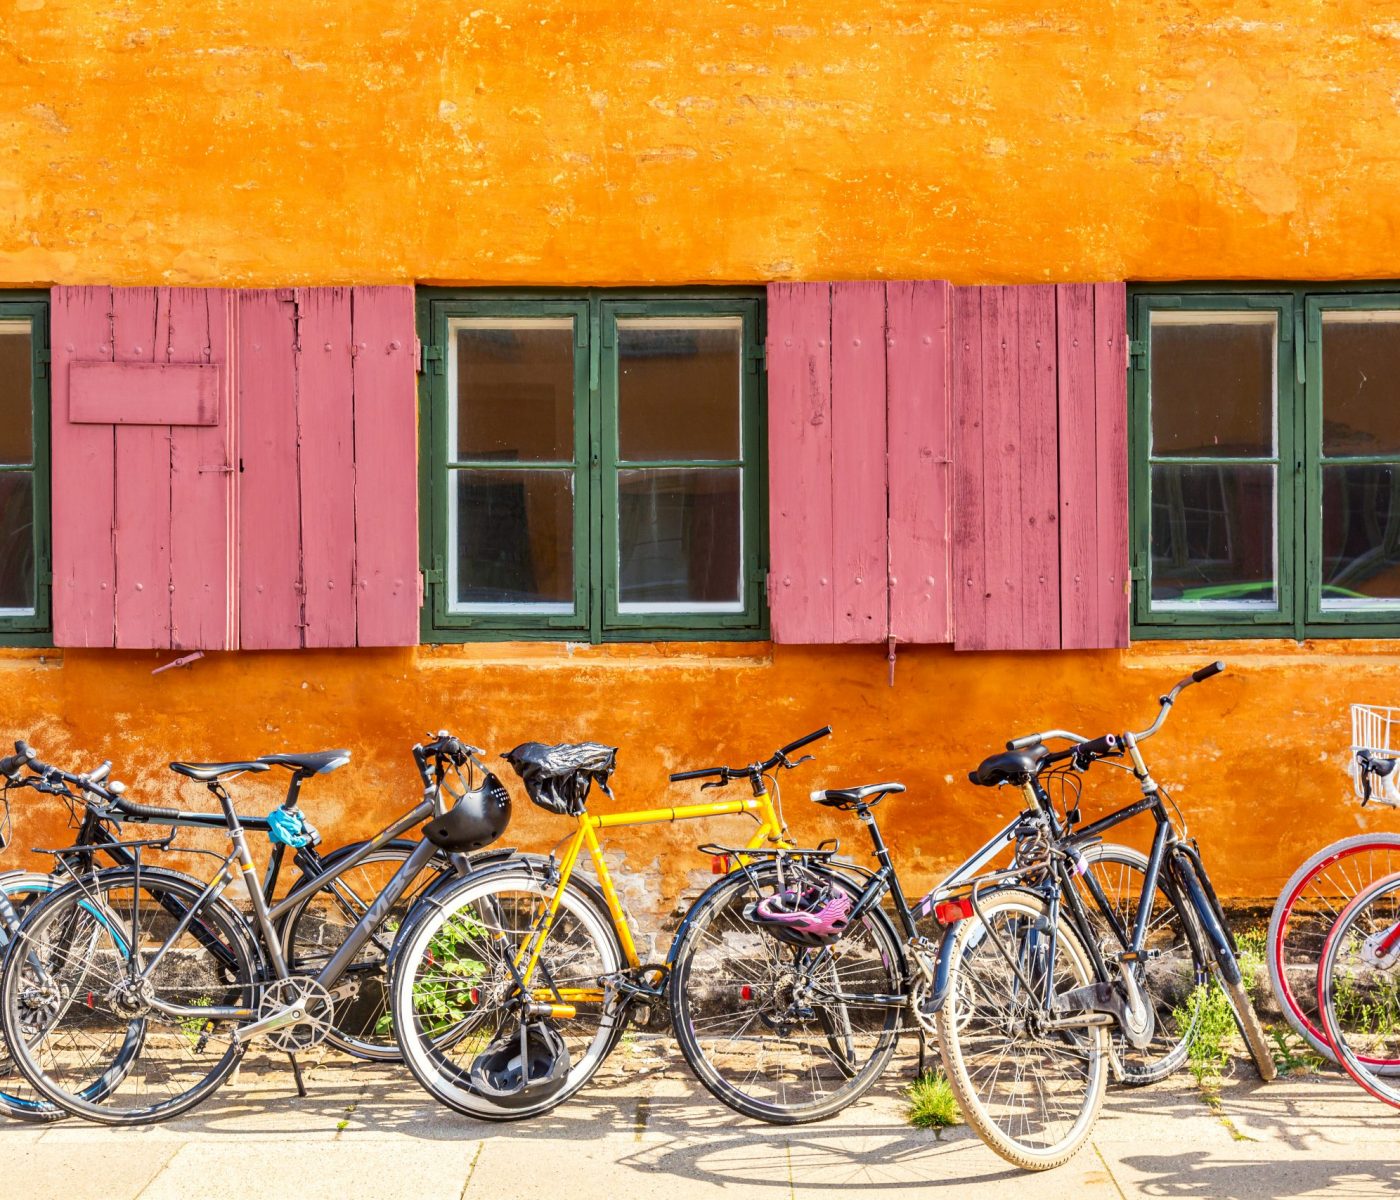 Old yellow house of Nyboder district with bikes. Old Medieval district in Copenhagen, Denmark. Picturesque of Copenhagen